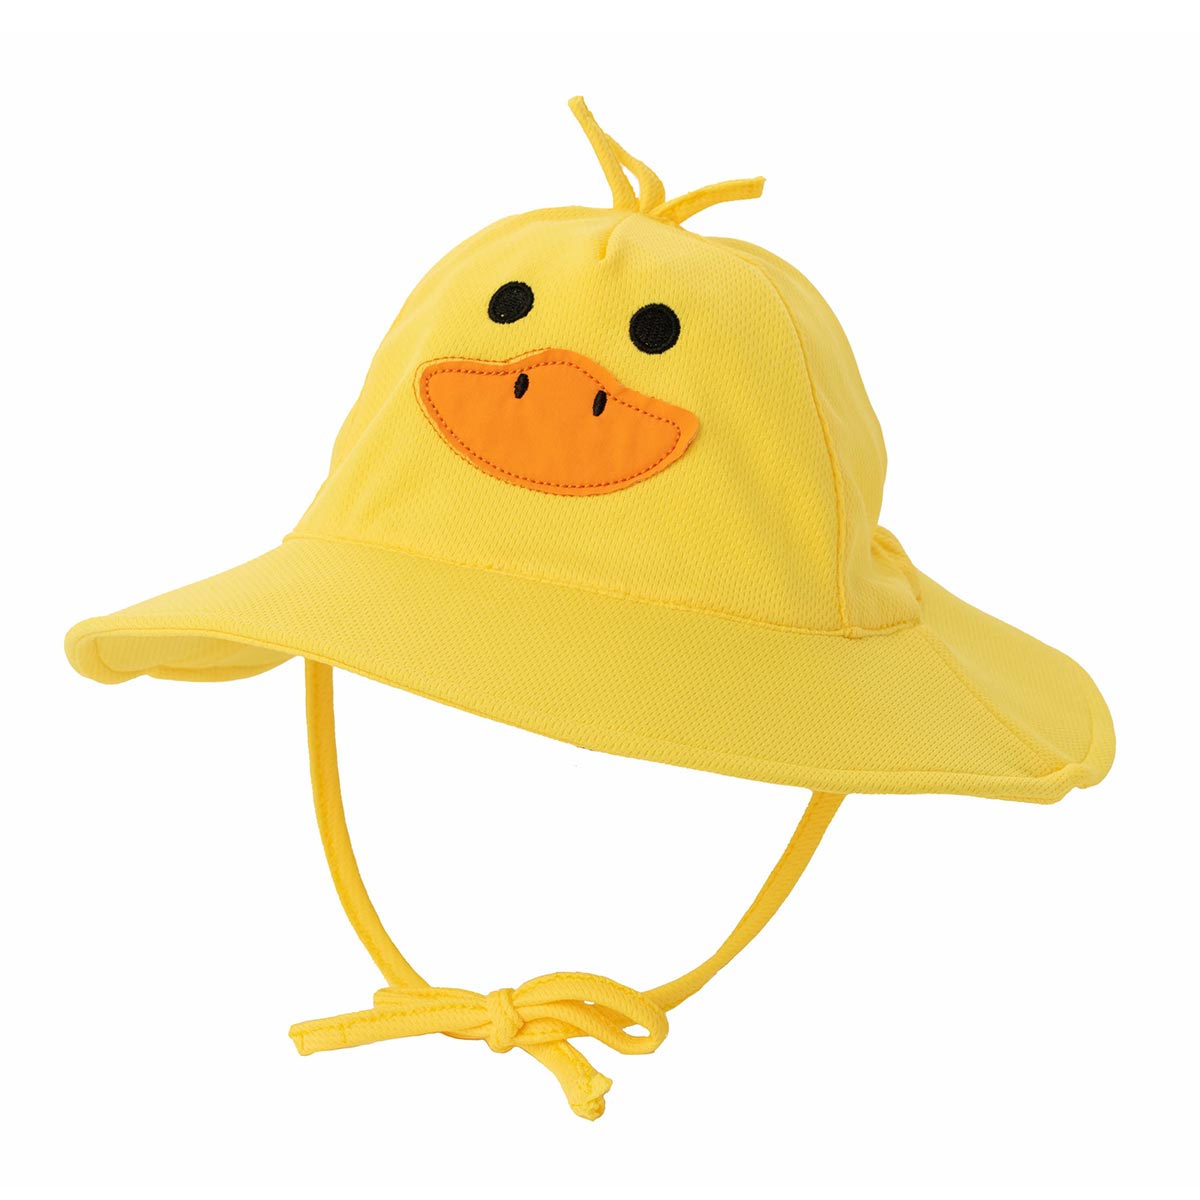 Breathable Designer Childrens Bucket Hat For Kids Perfect For